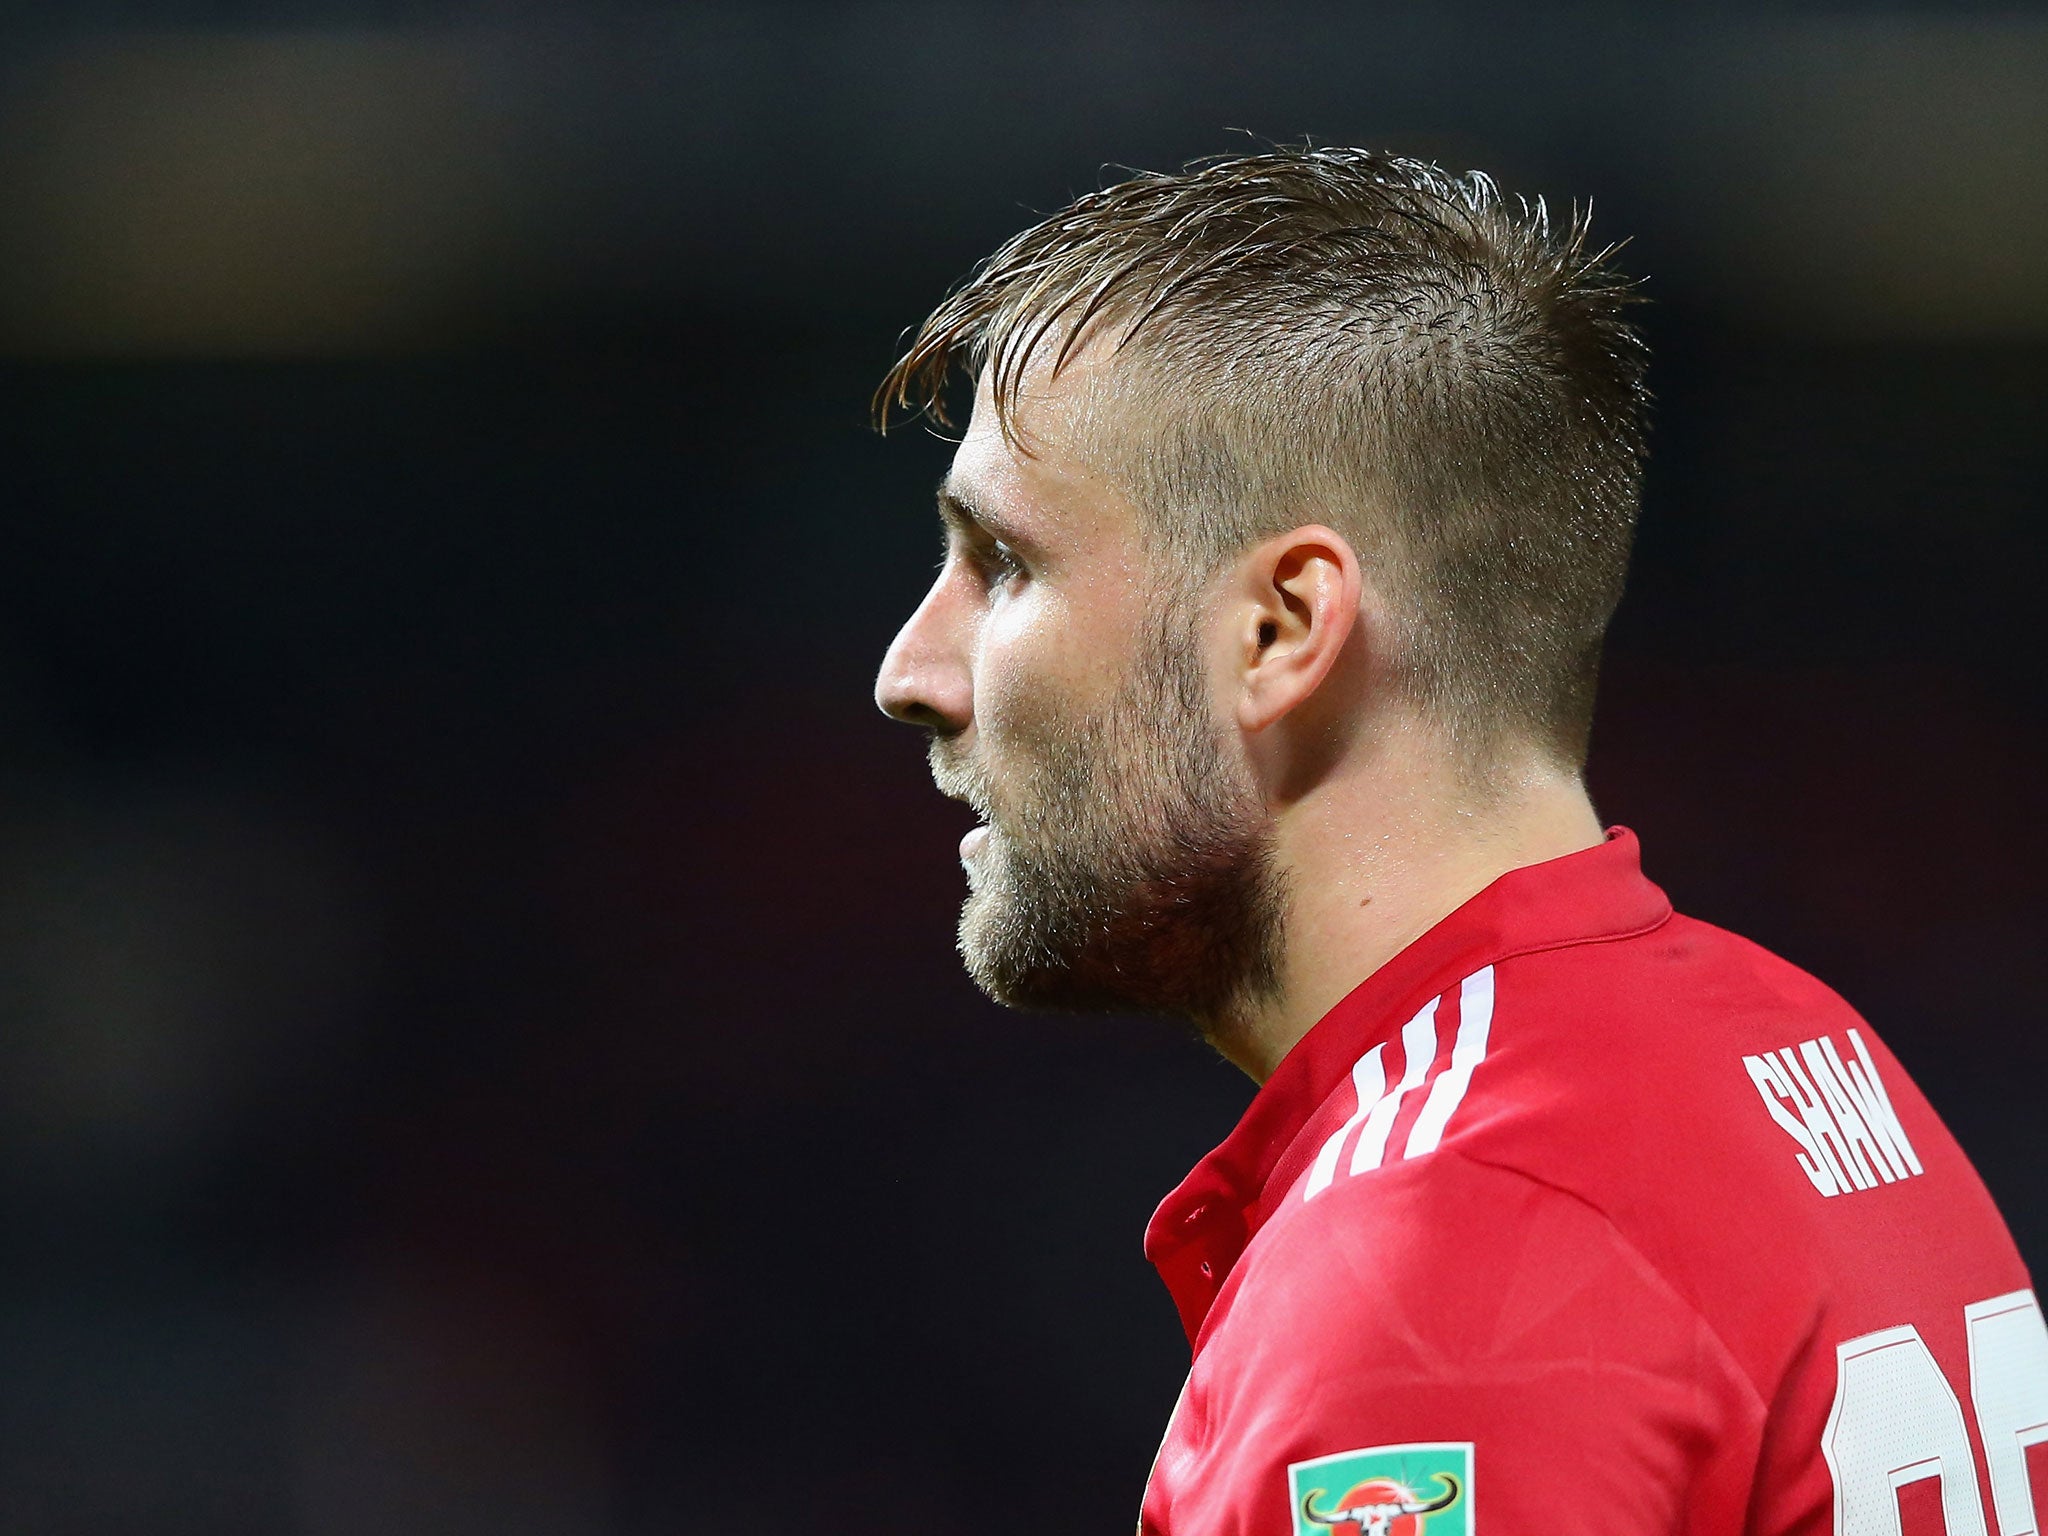 Luke Shaw has endured a difficult time at United since joining in 2014